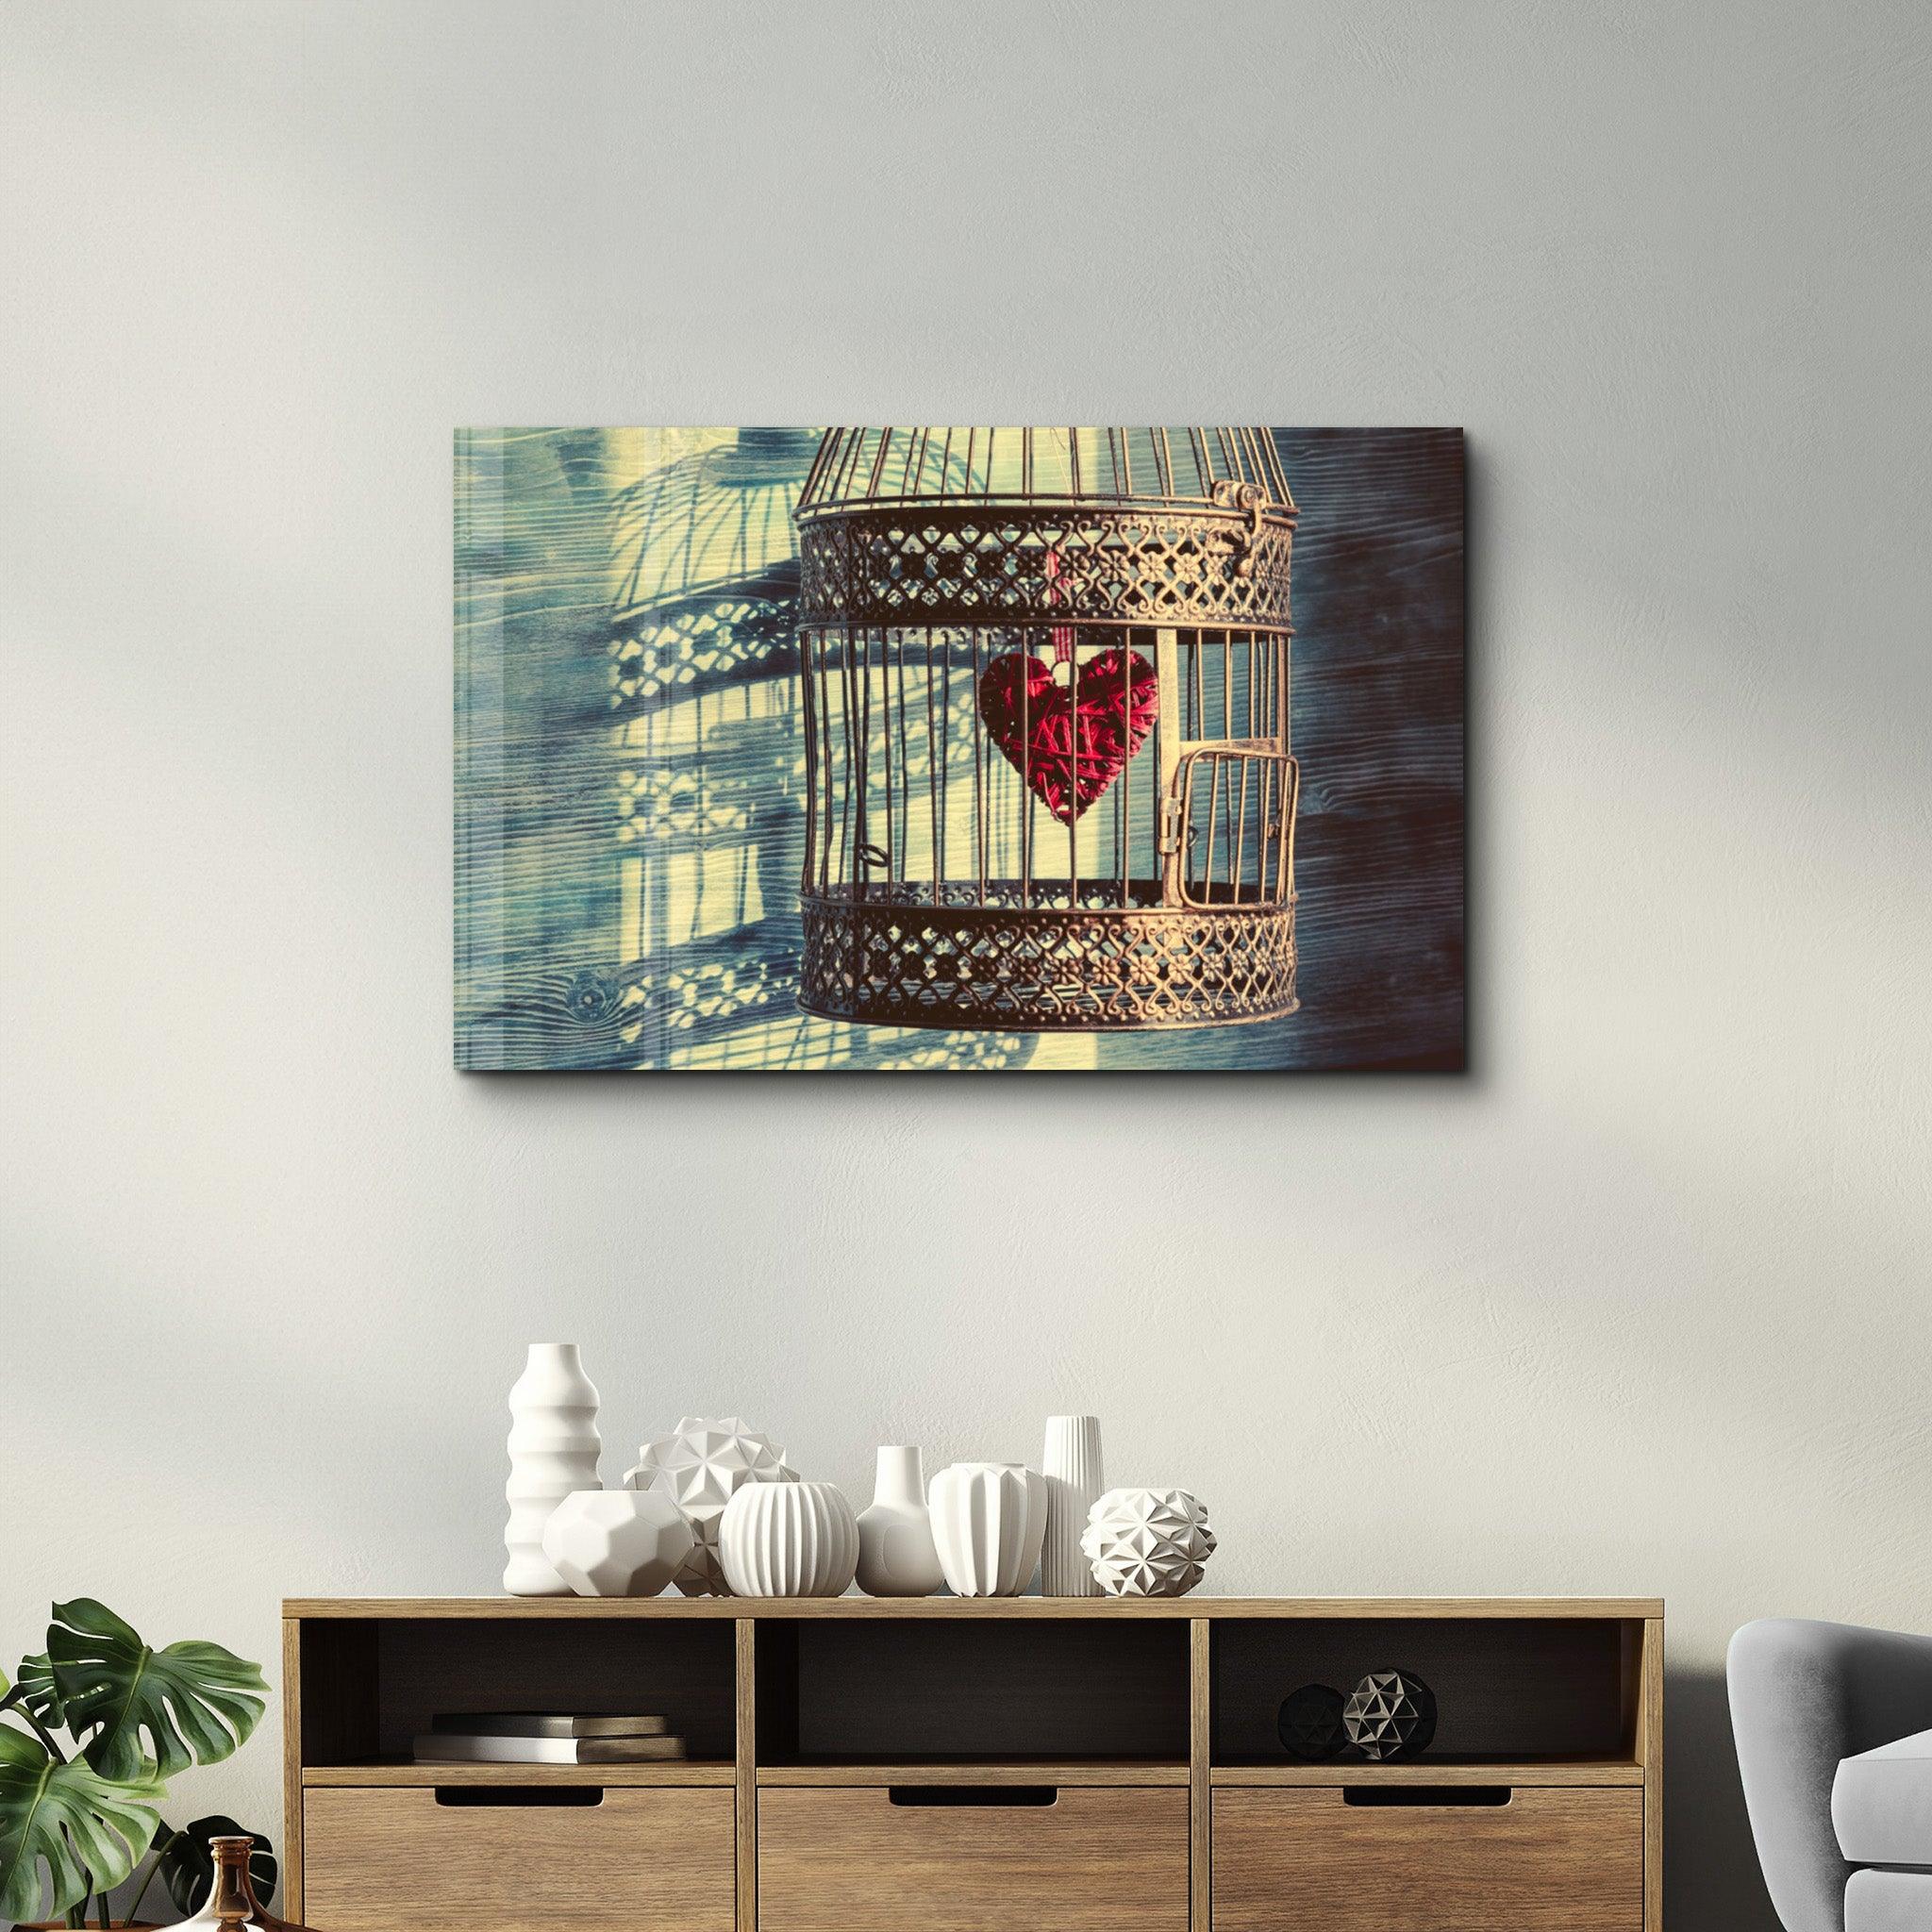 The Heart in the Cage | Glass Wall Art - ArtDesigna Glass Printing Wall Art